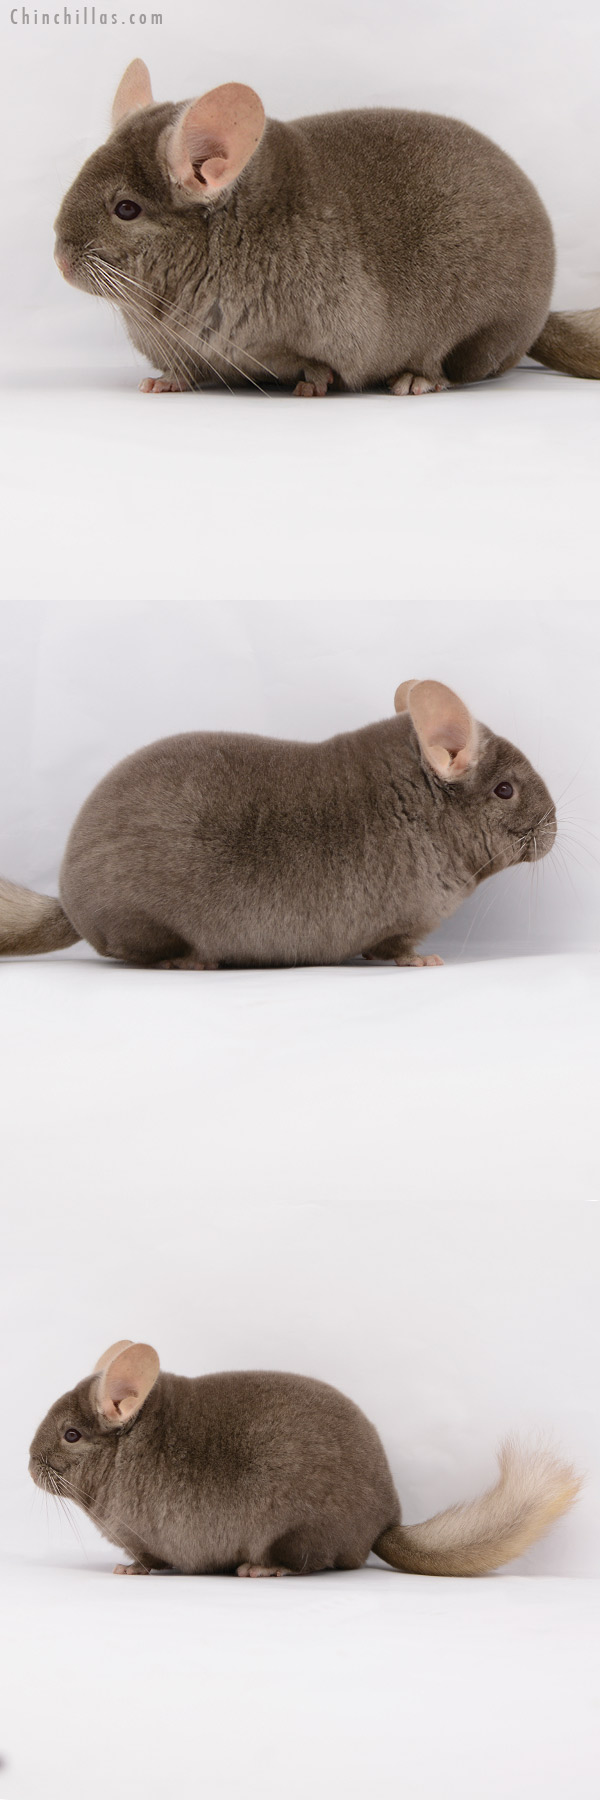 Chinchilla or related item offered for sale or export on Chinchillas.com - 20214 Large Blocky Premium Production Quality Tan Female Chinchilla